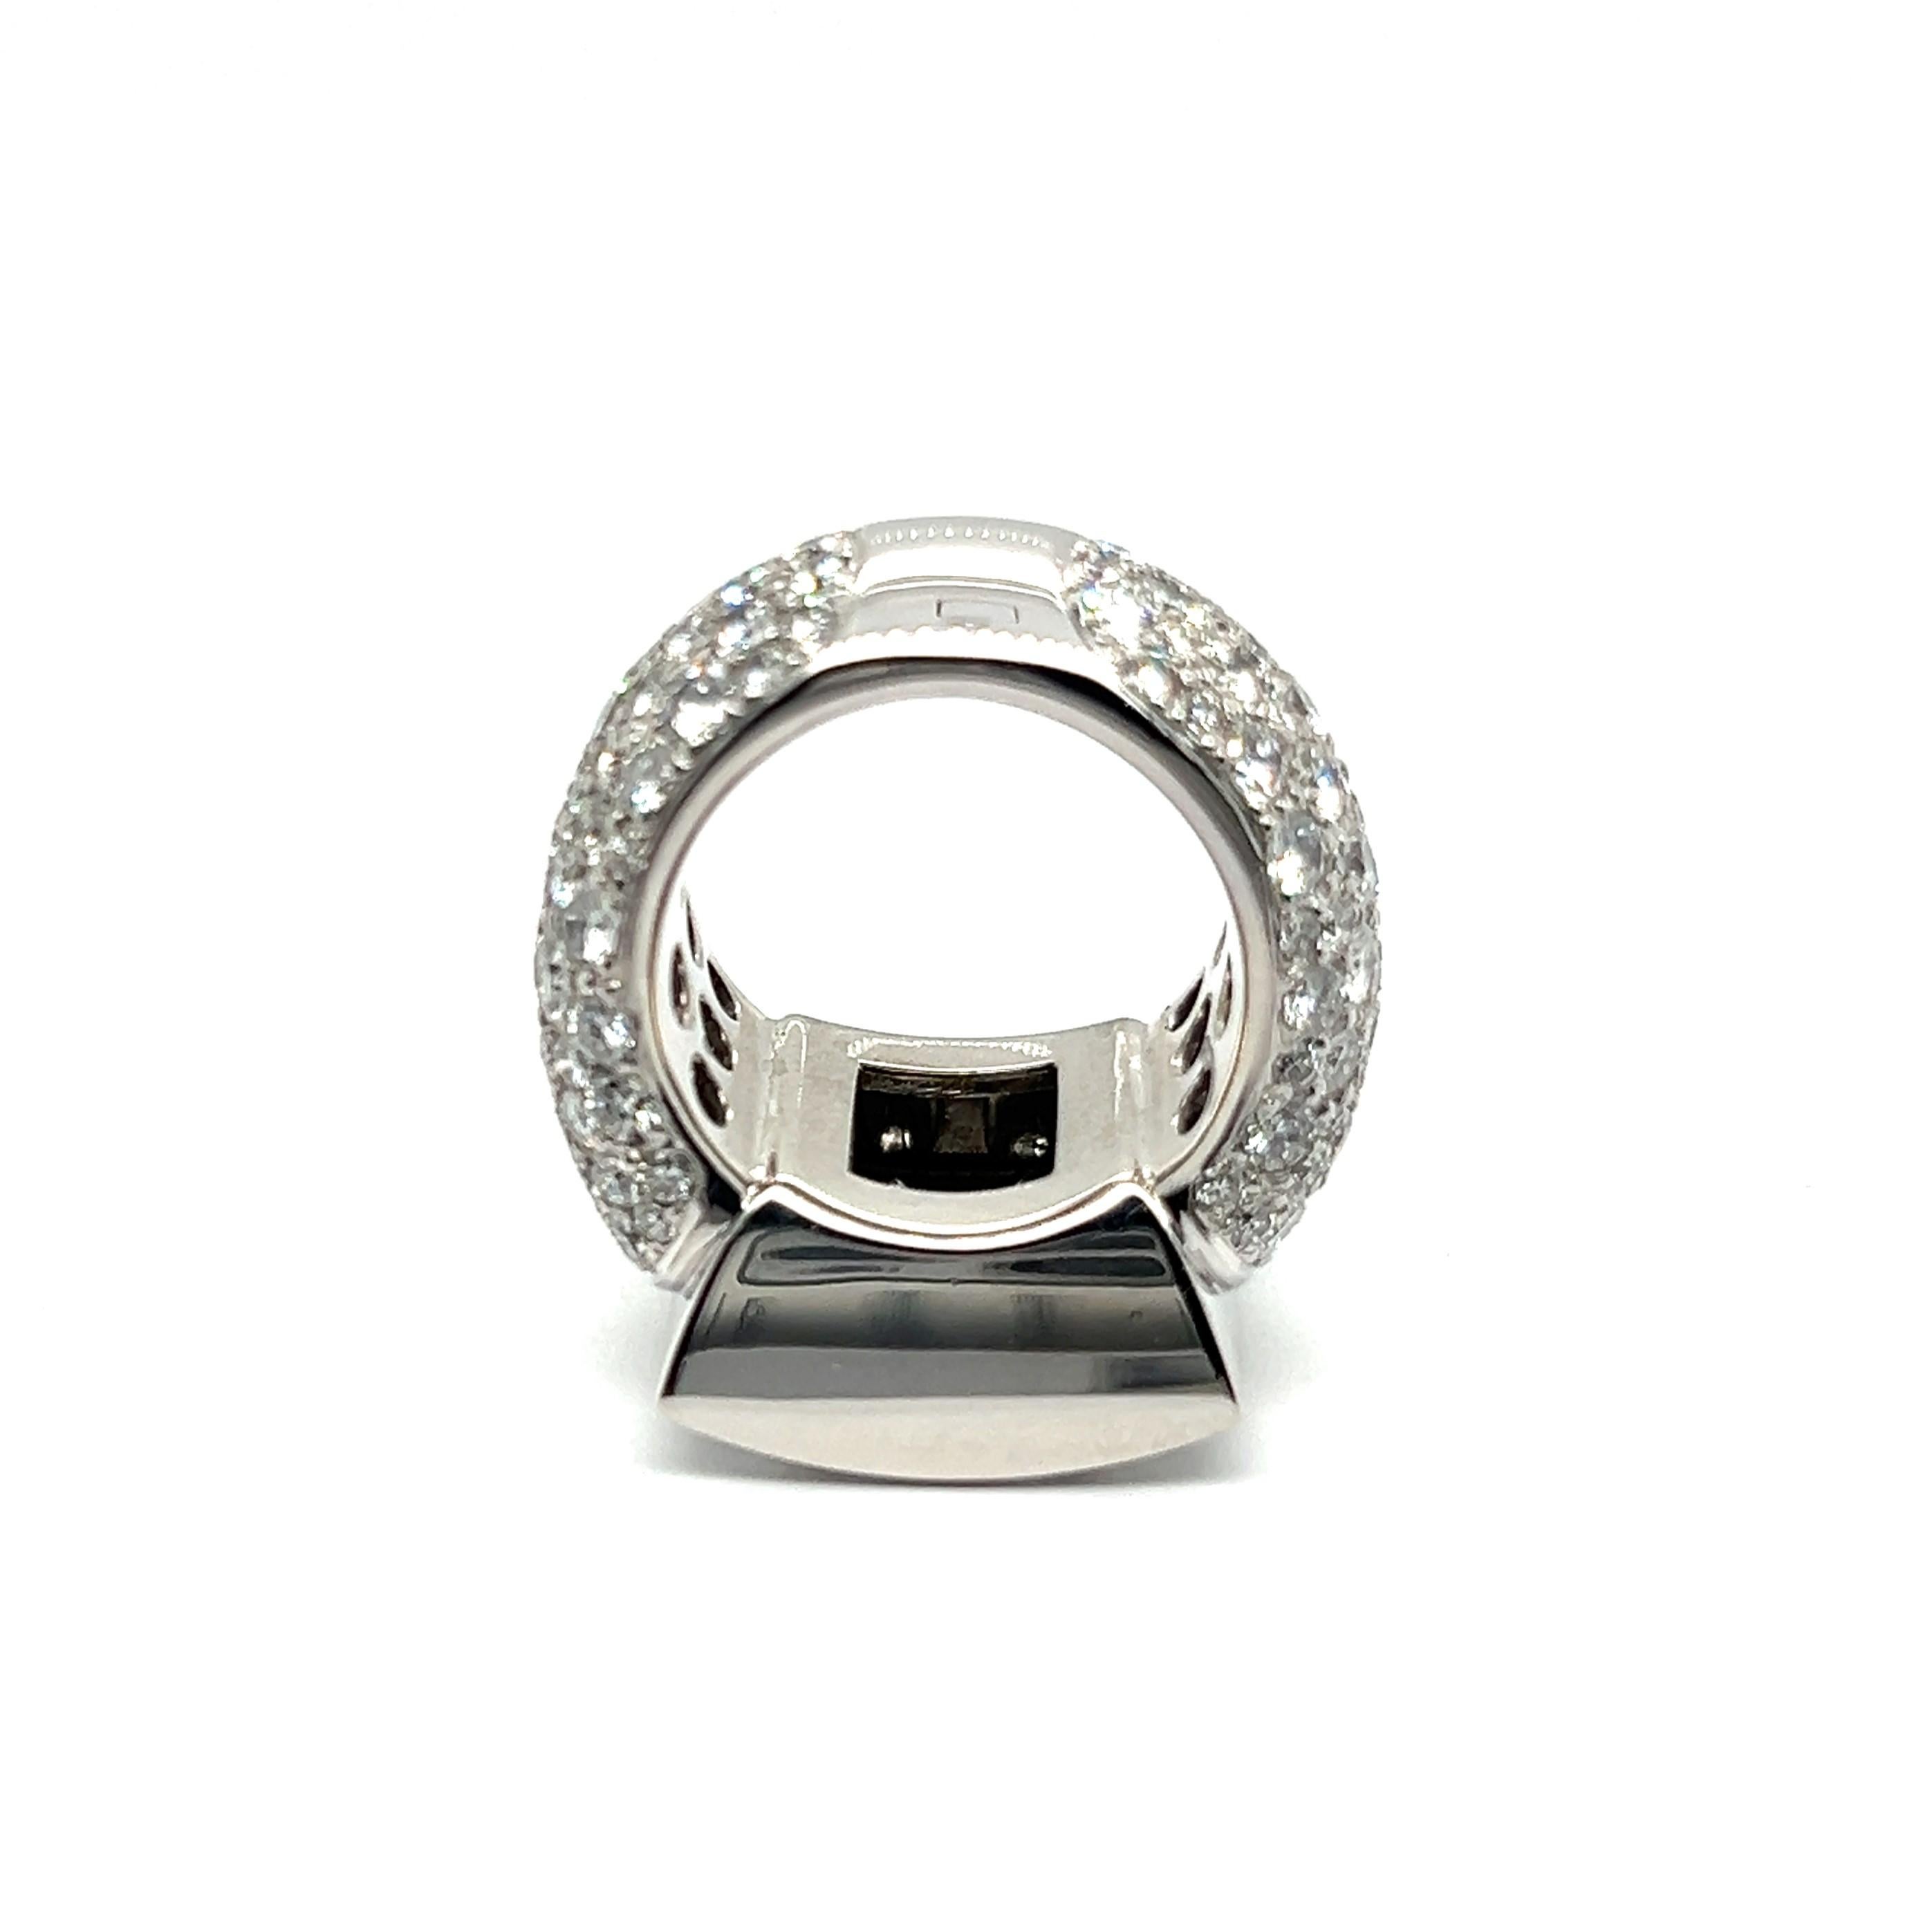 Bold Graphic Ring with Diamonds in 18 Karat White Gold by Majo Fruithof For Sale 4